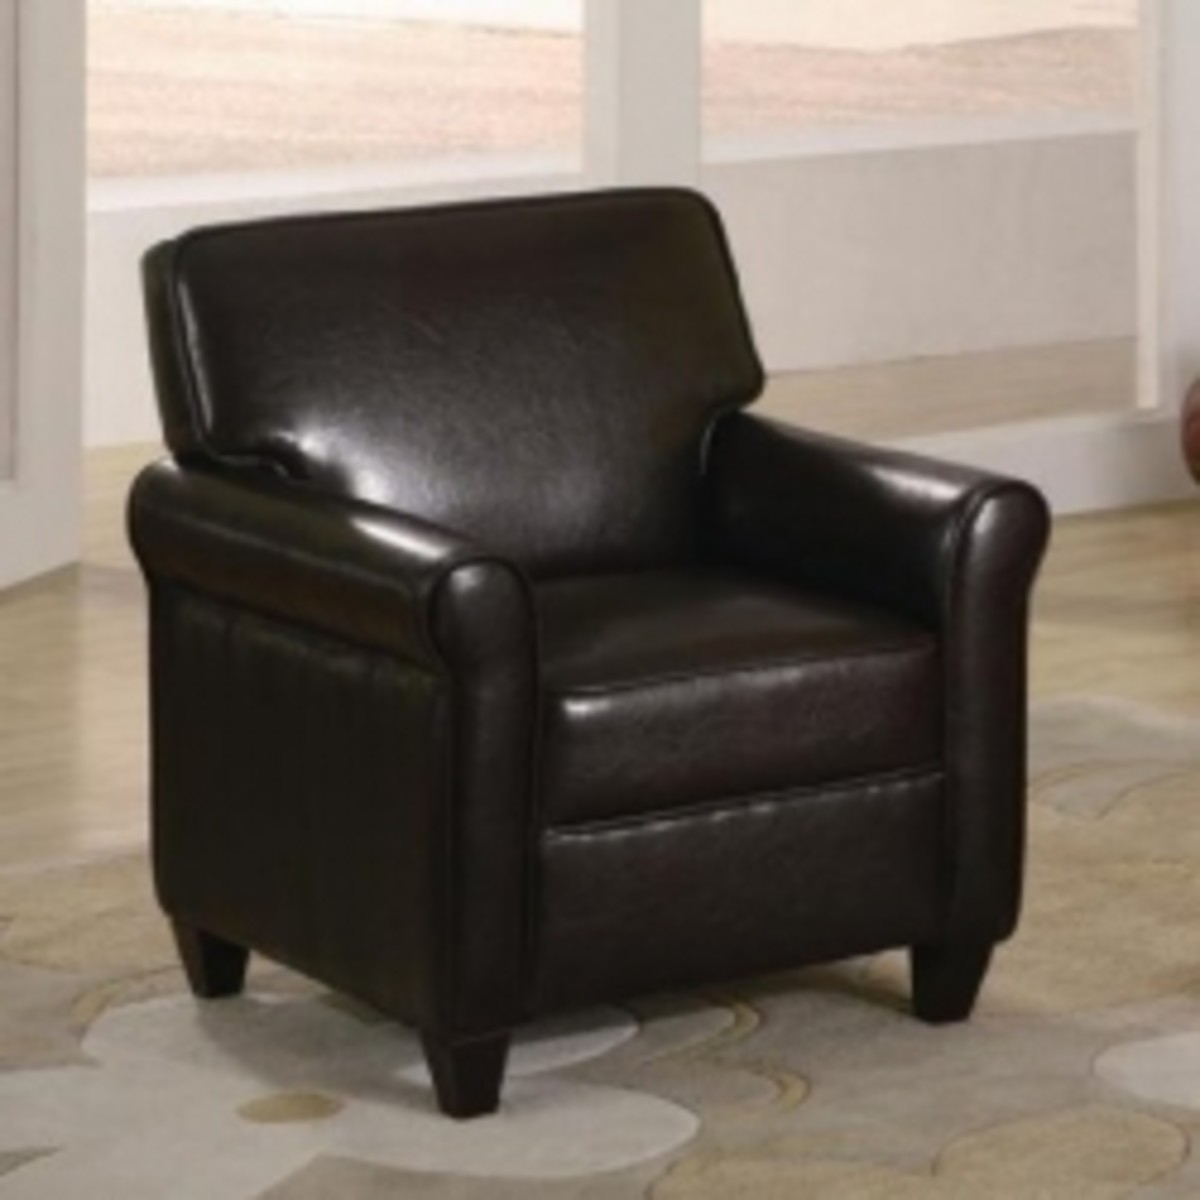 Espresso Kids Chair Seat Childrens Brown Leather - Like